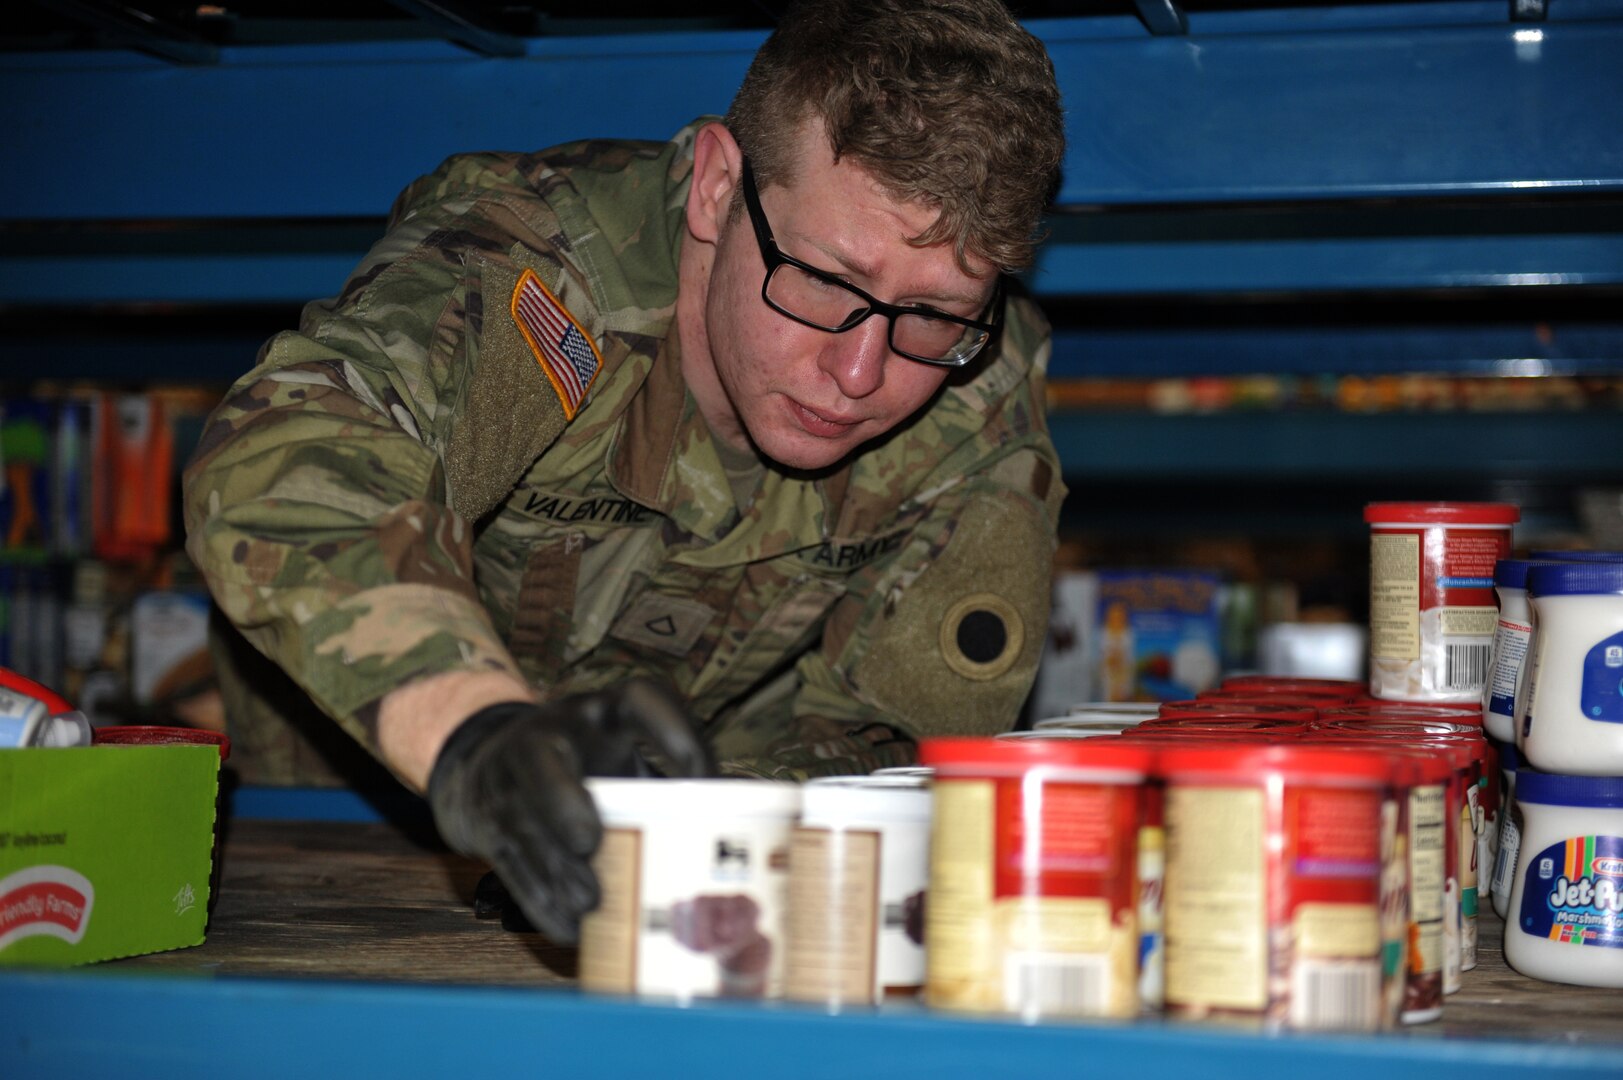 Spc. Patrick Valentine, assigned to the Ohio National Guard’s HHC 1-148th Infantry Regiment – 37th Infantry Brigade Combat Team, stocks shelves at the Toledo Northwestern Ohio Food Bank, March 25, 2020. Nearly 400 Ohio National Guard members were activated to provide humanitarian missions in support of COVID-19 relief efforts.